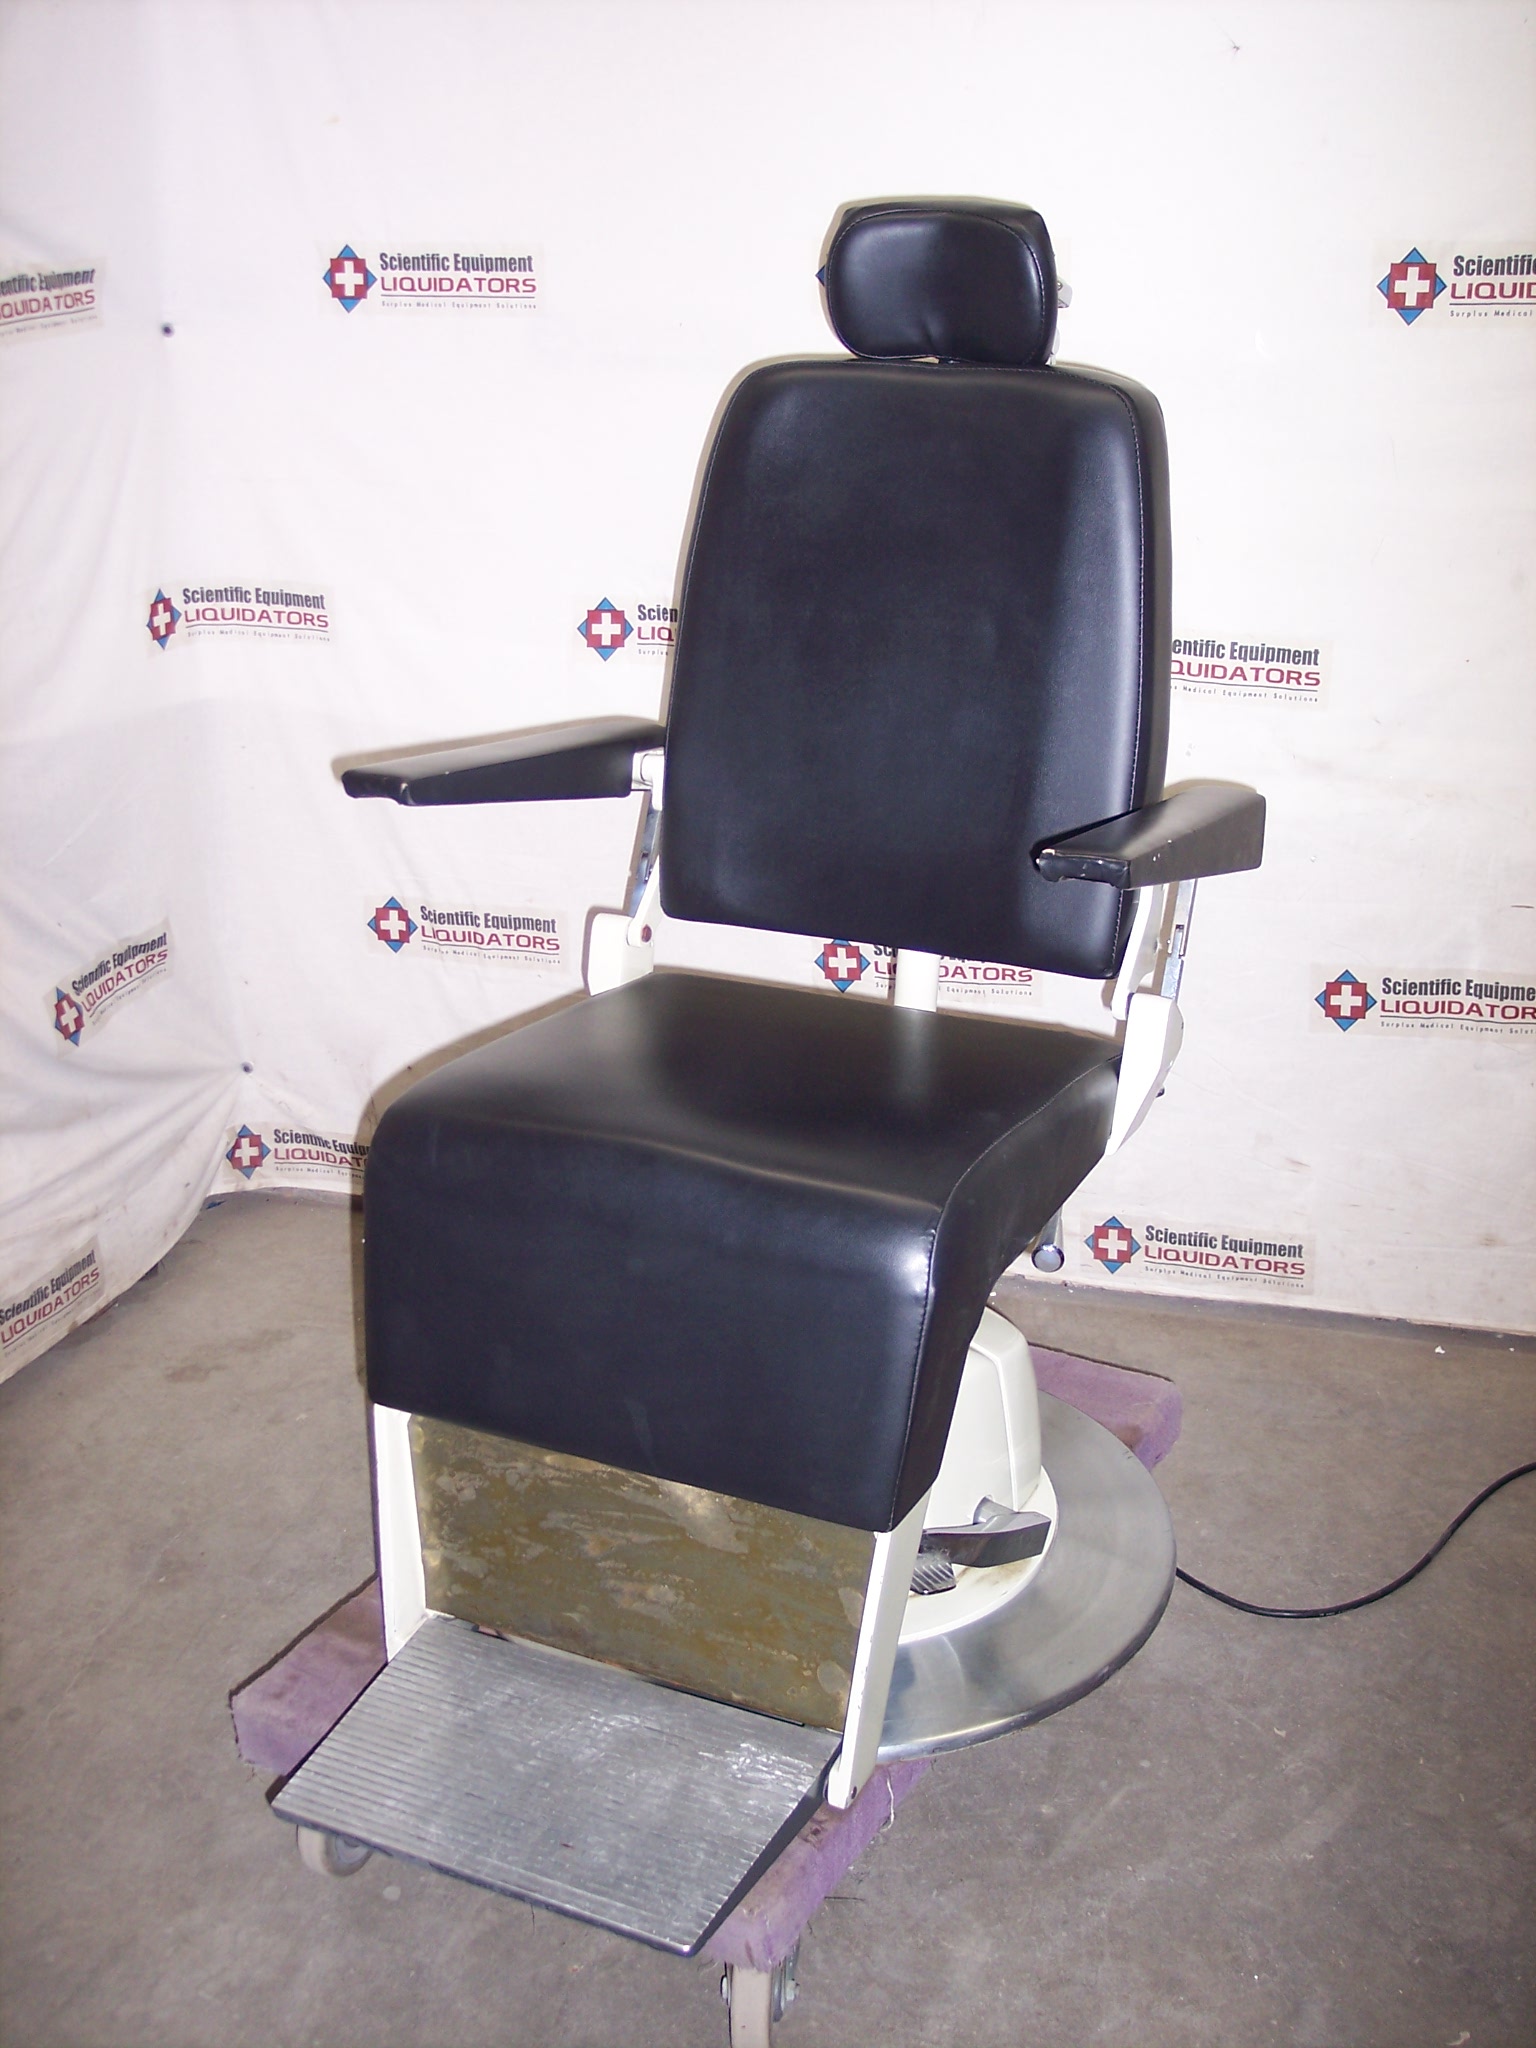 Reliance 665 Ophthalmic Chair